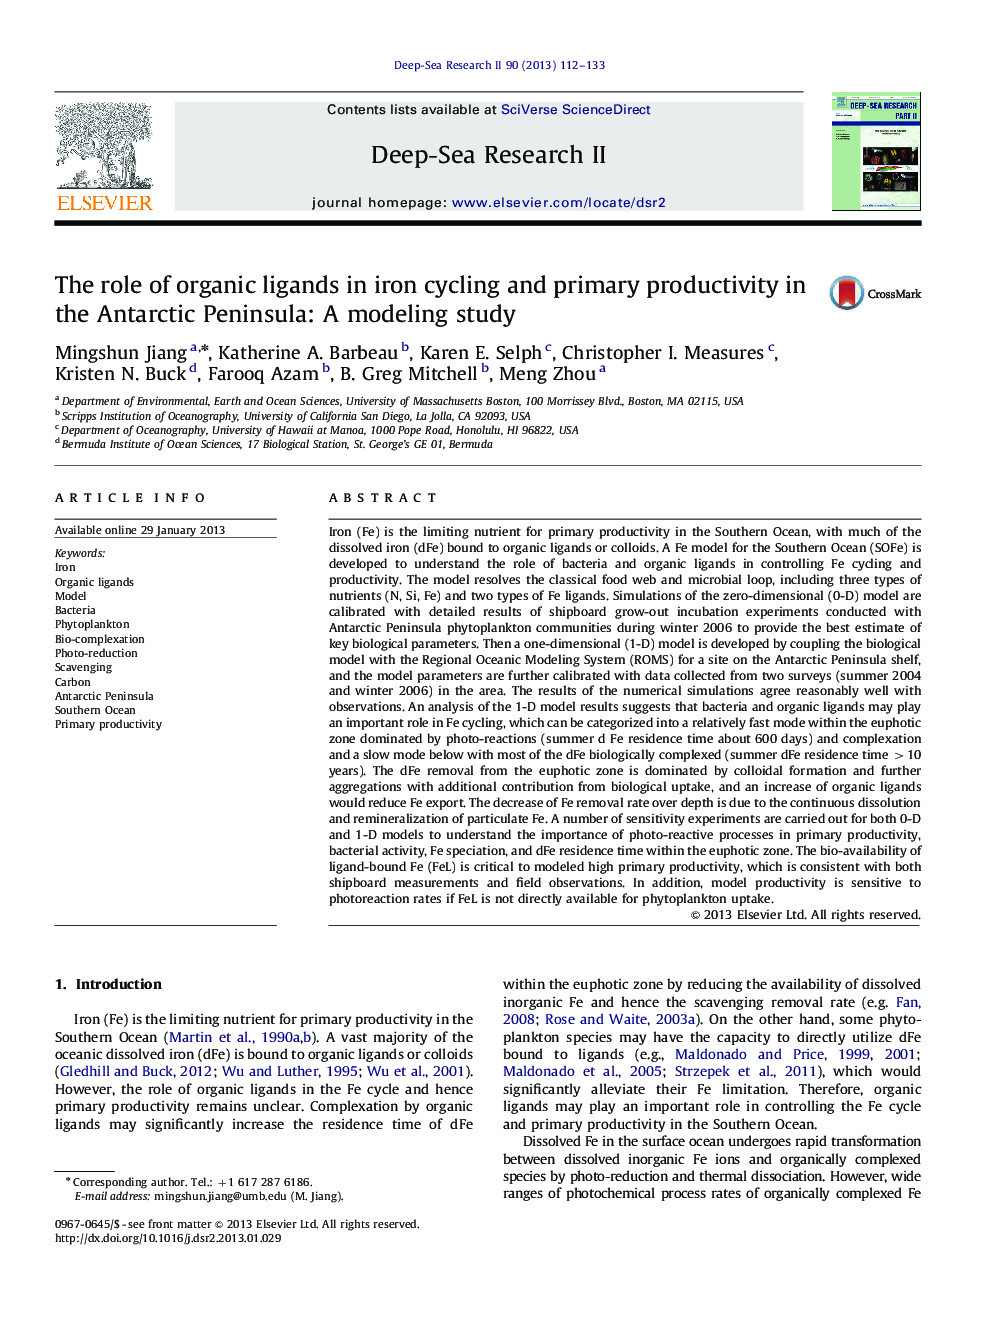 The role of organic ligands in iron cycling and primary productivity in the Antarctic Peninsula: A modeling study